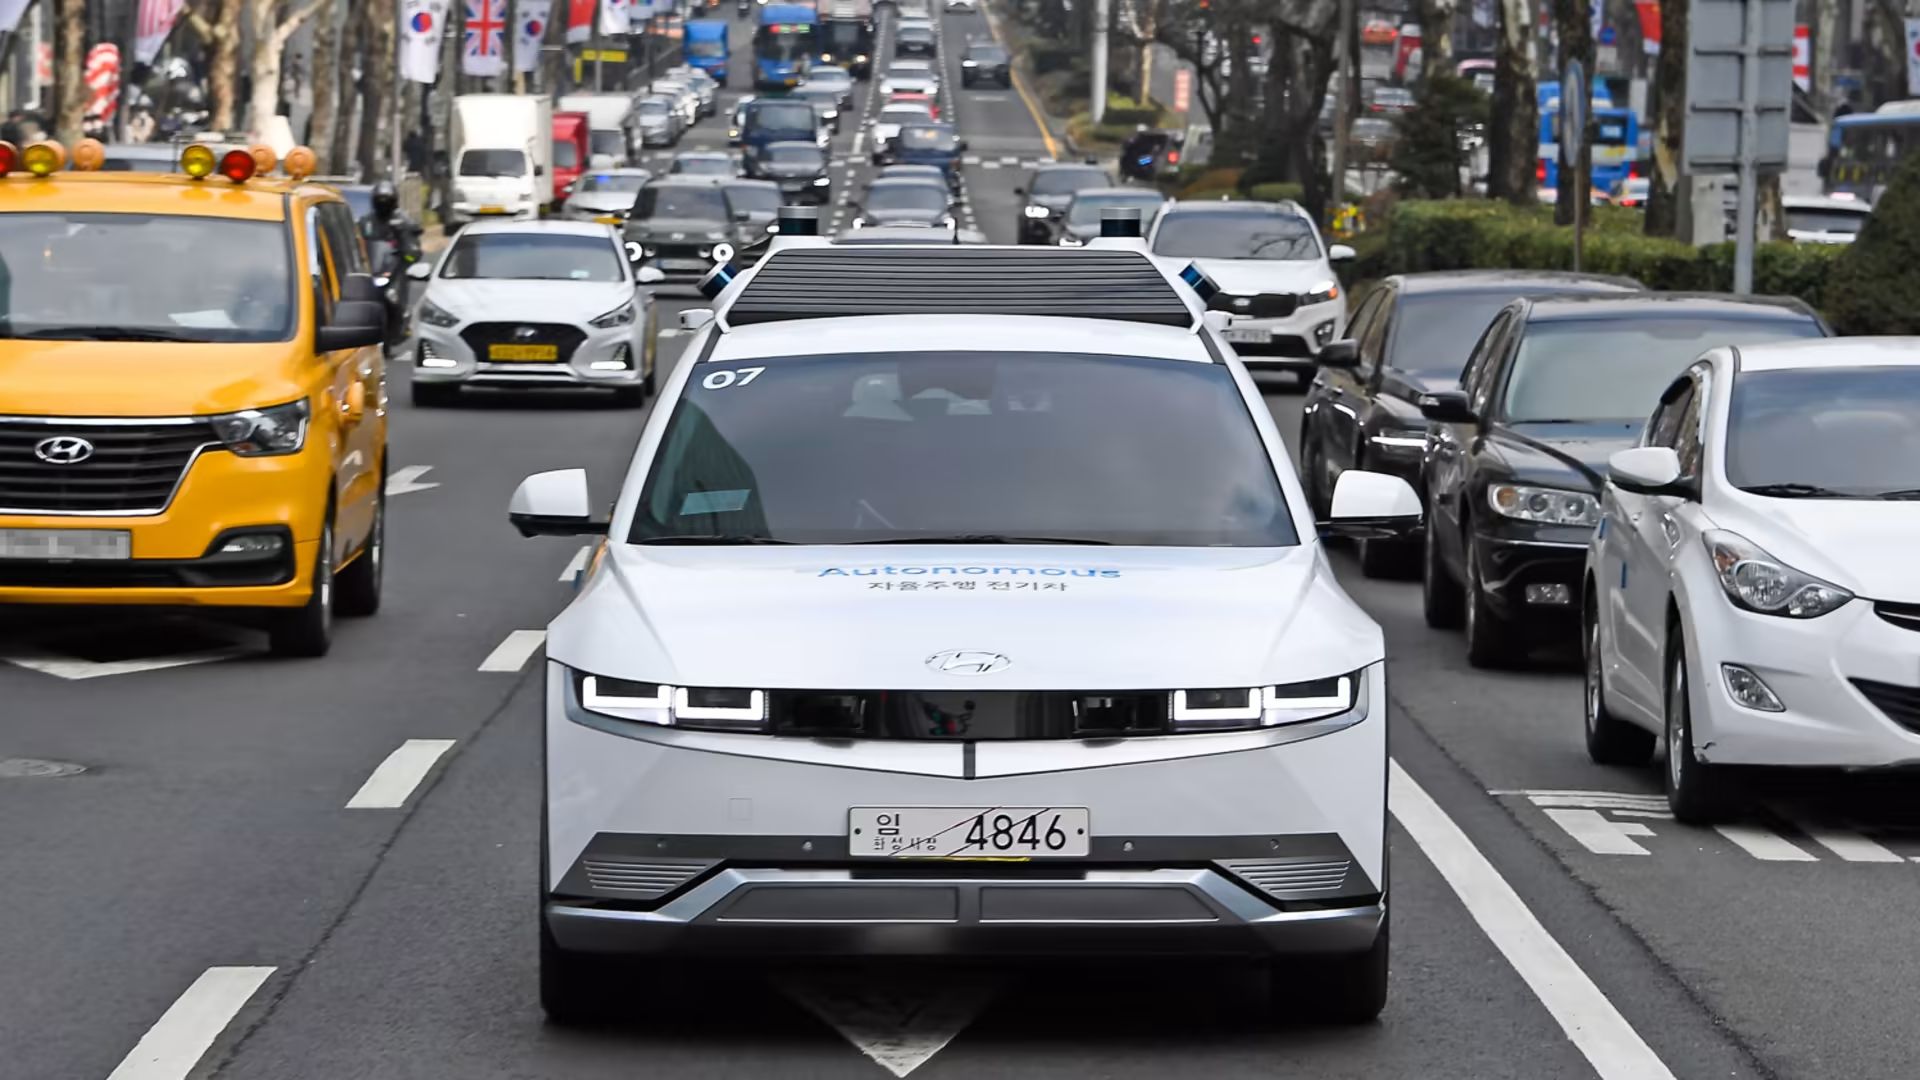 chinas-new-guidelines-for-autonomous-vehicles-and-robotaxis